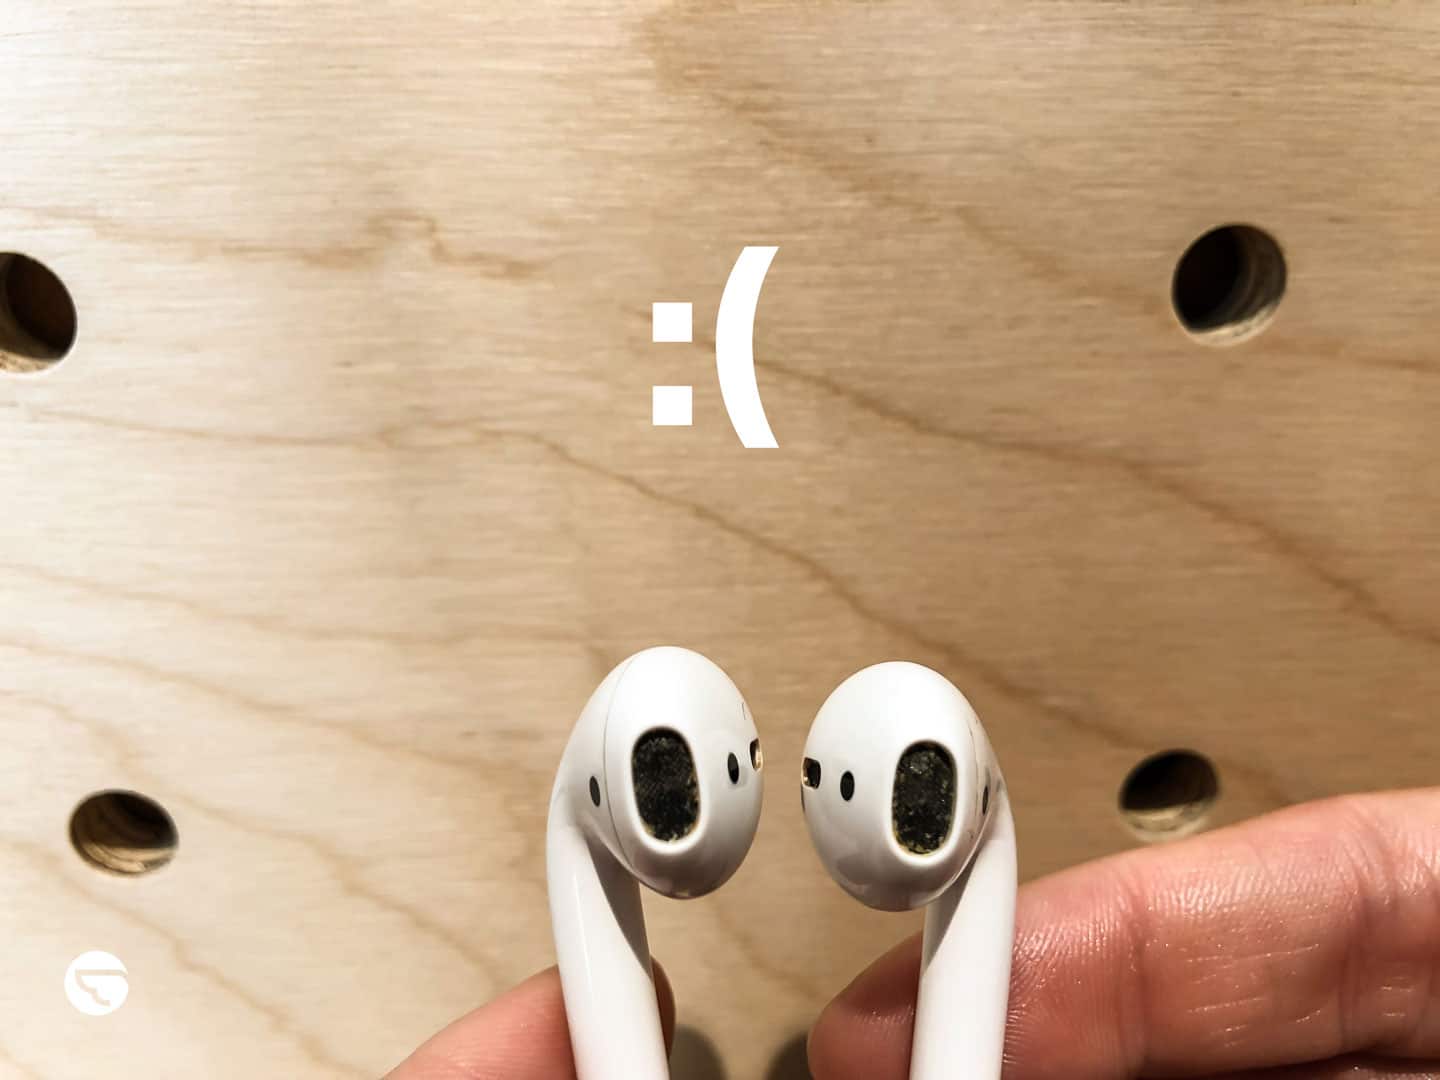 Cleaning AirPods earwax